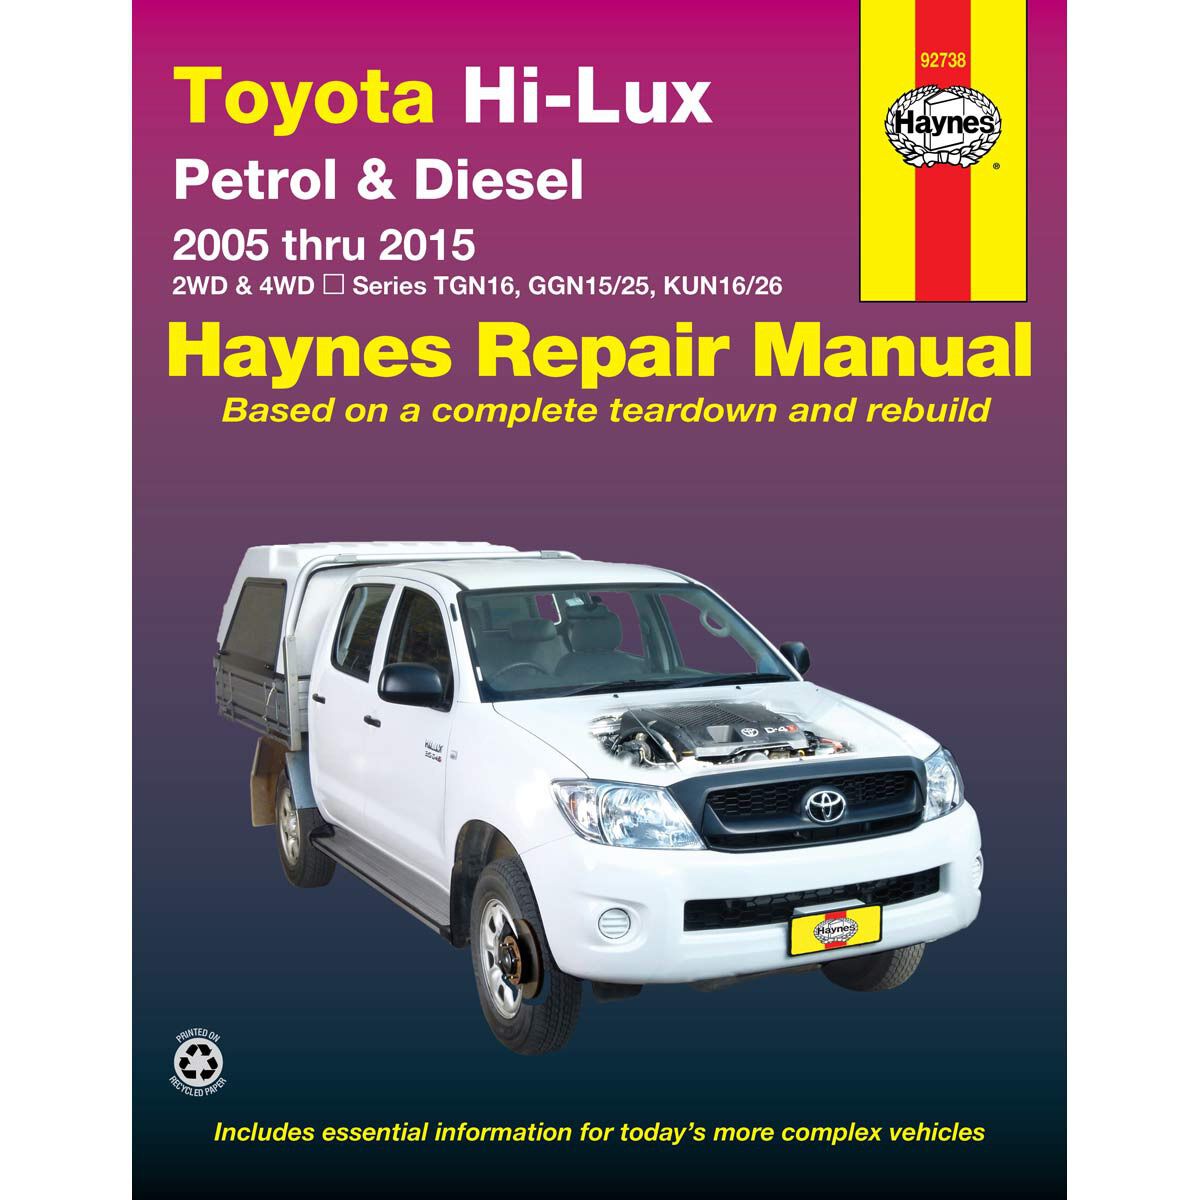 Toyota HILUX 2005-2010 Workshop Service Repair Manual on CD for sale online 